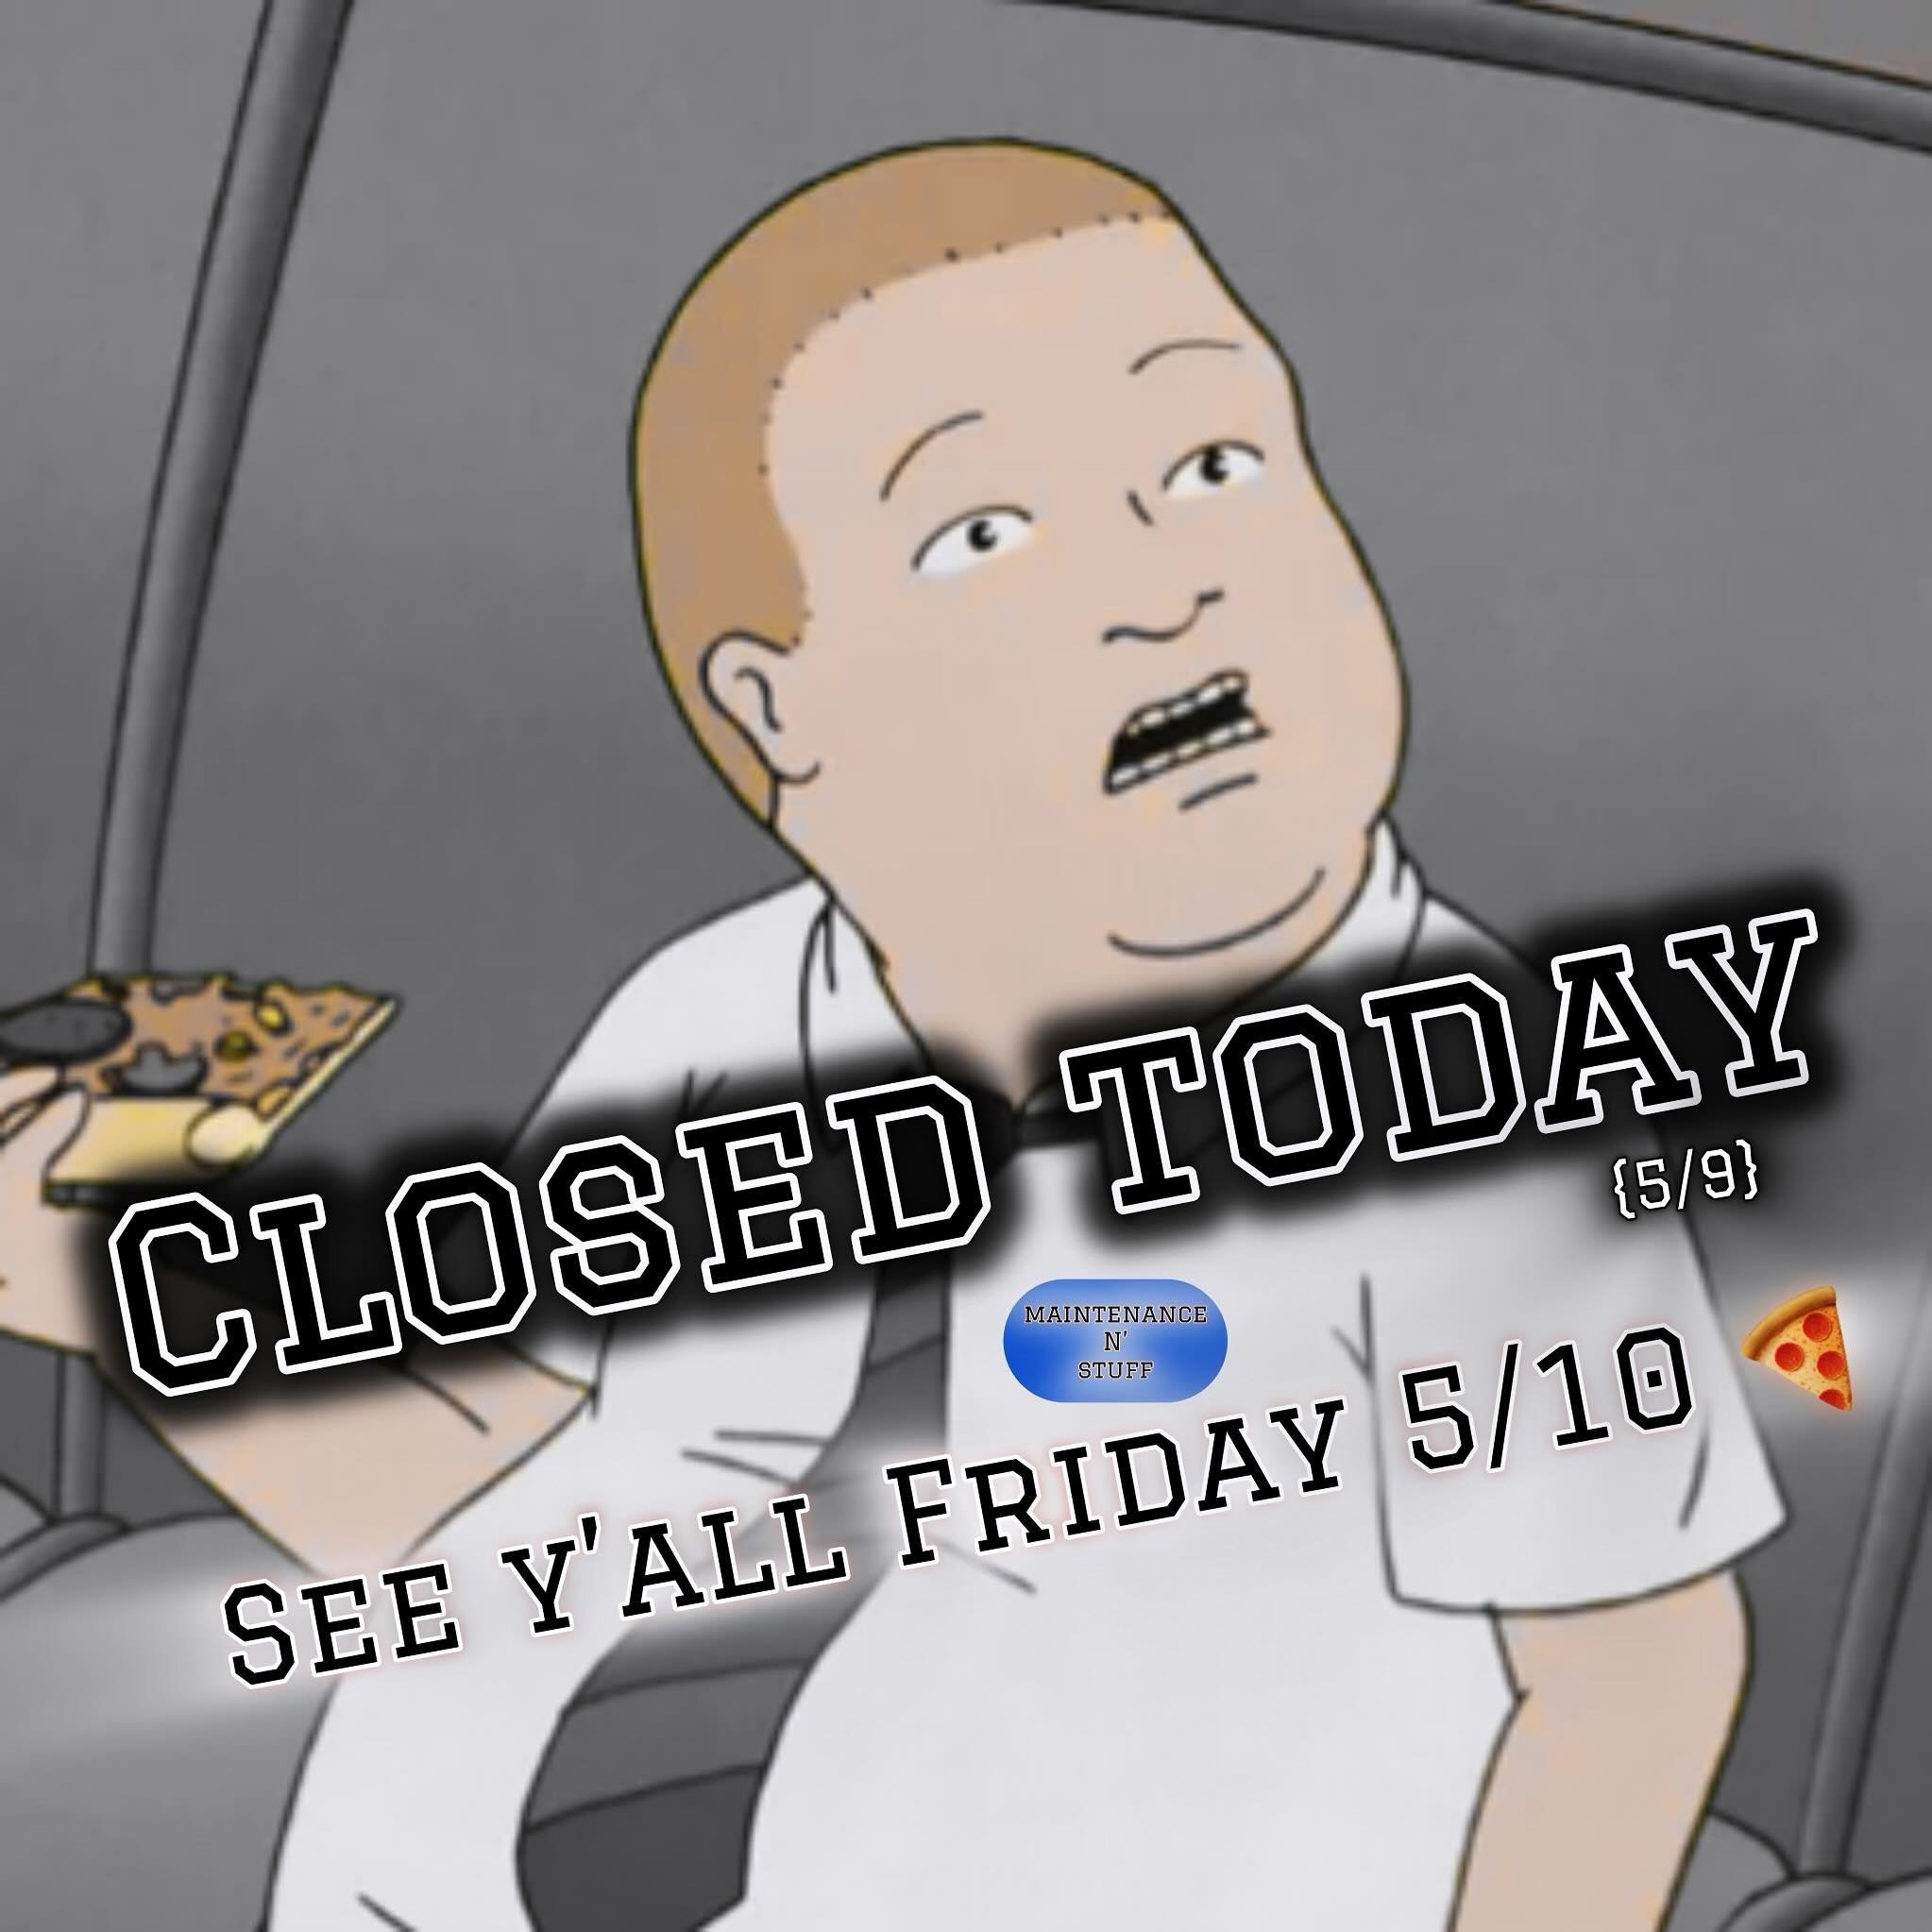 Sorry y&rsquo;all, but we are closed today for maintenance! See ya tomorrow (Friday 5/10)&hearts;️